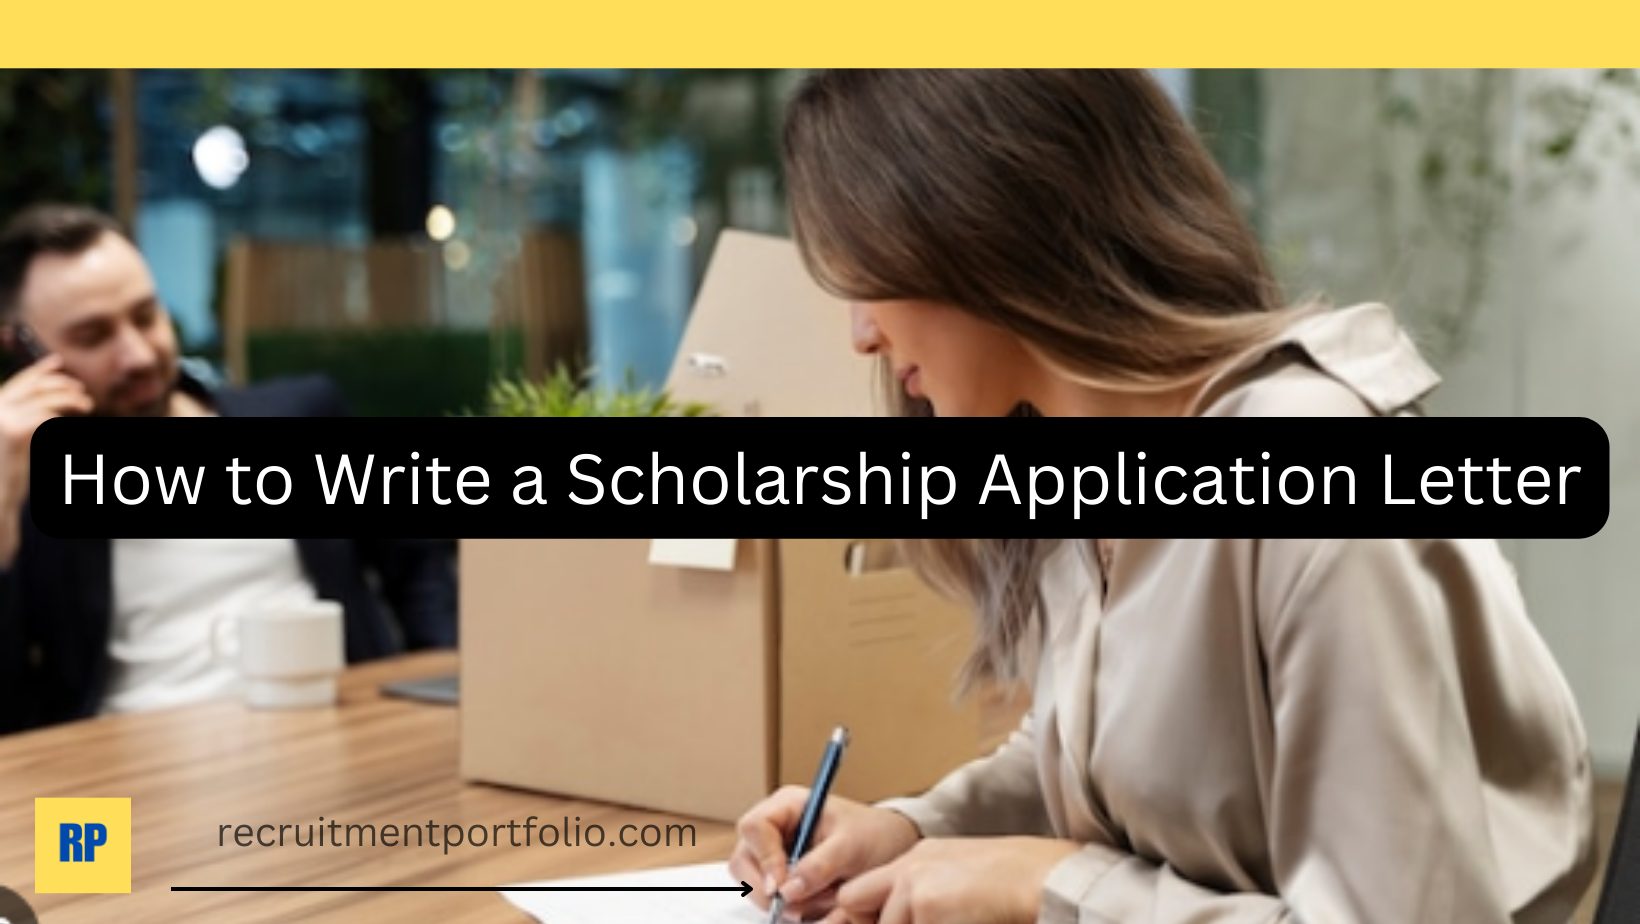 How to Write a Scholarship Application